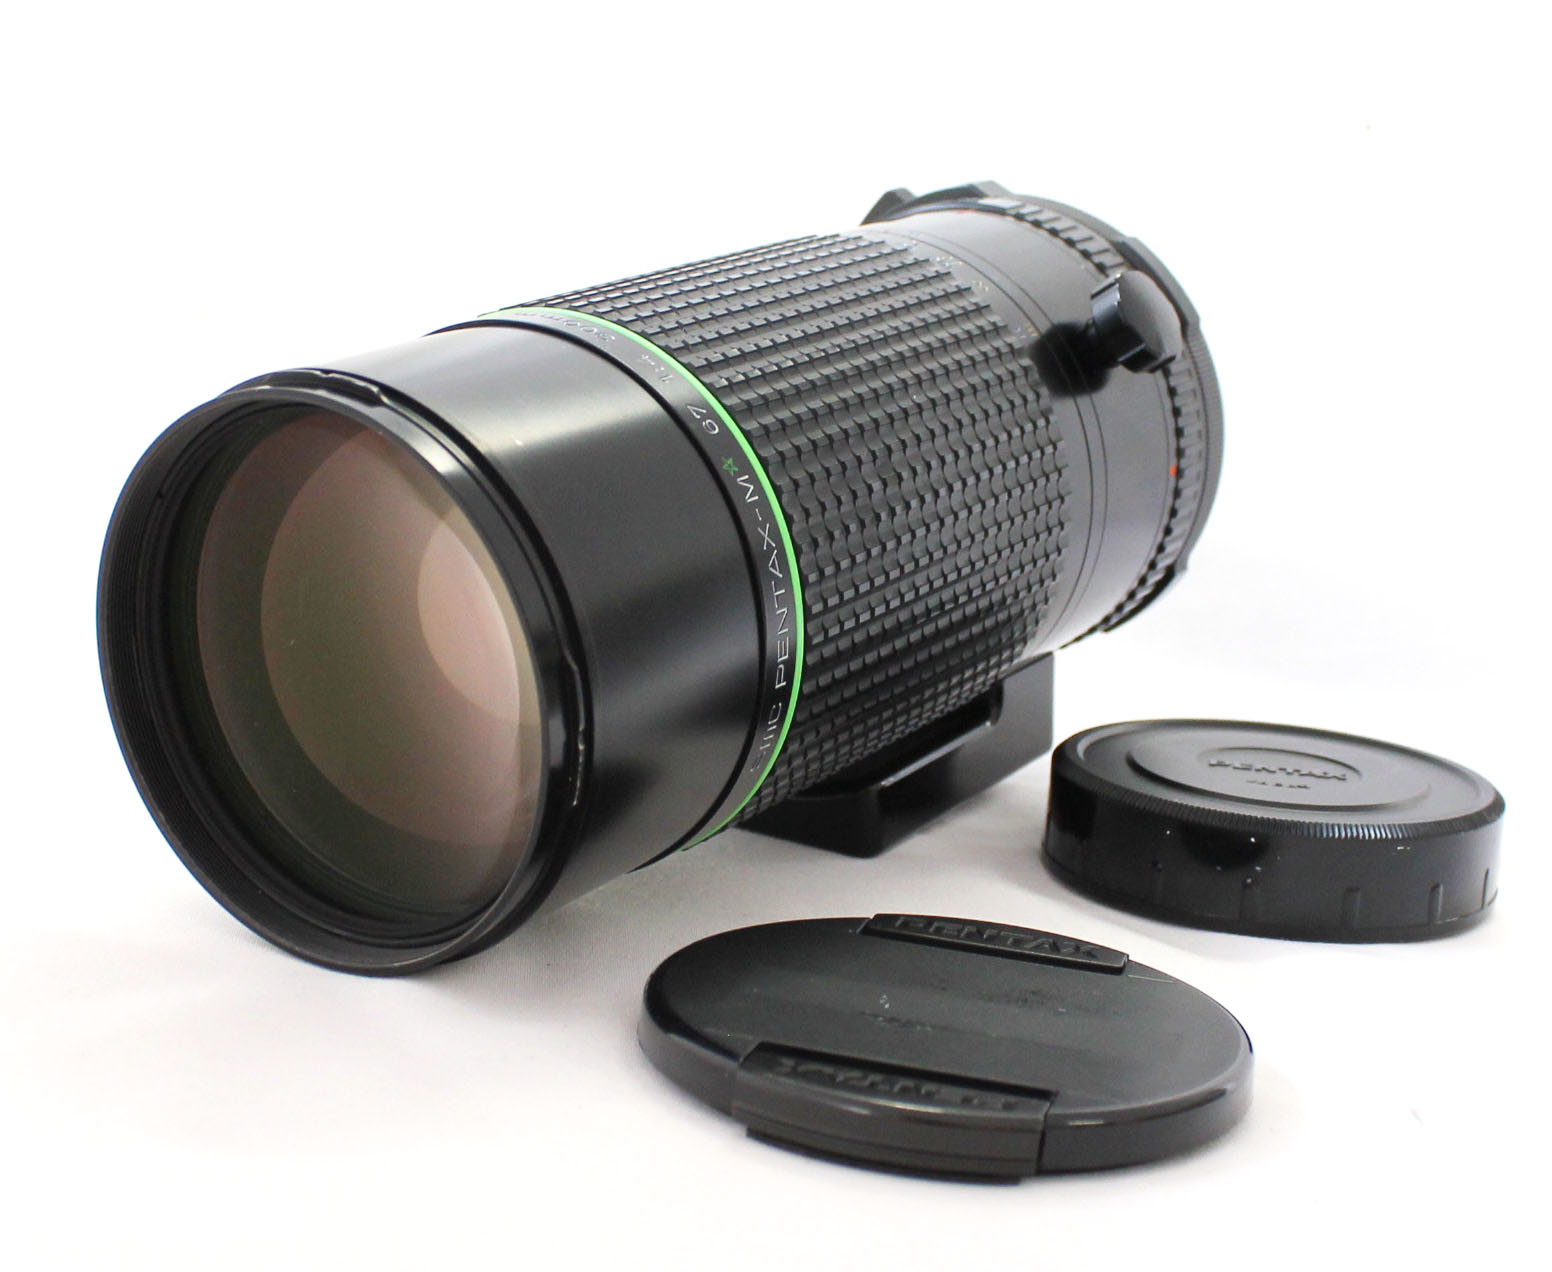 Japan Used Camera Shop | SMC Pentax-M* 67 300mm F/4 ED IF Green Star Lens for 6x7 67 II from Japan